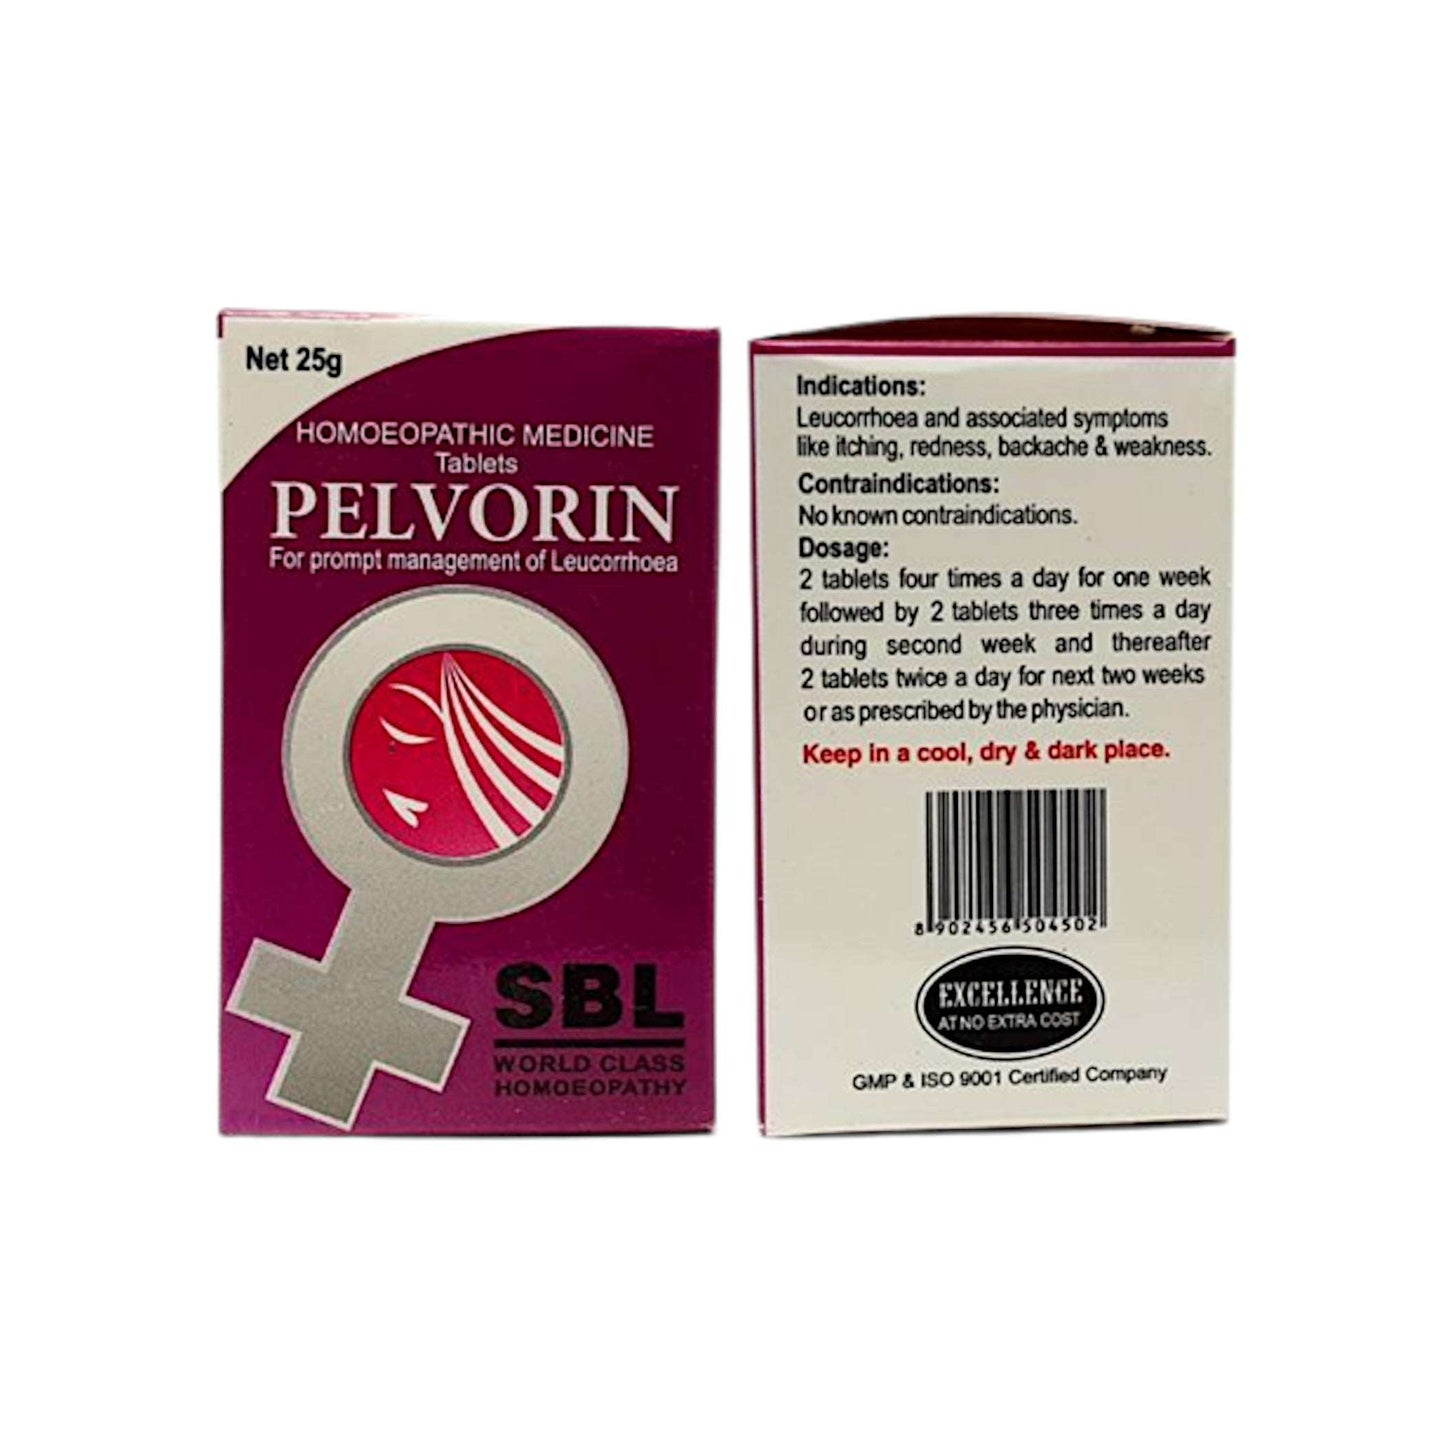 SBL Pelvorin Tablets(25 g - Women's Health Homeopathic Remedy.